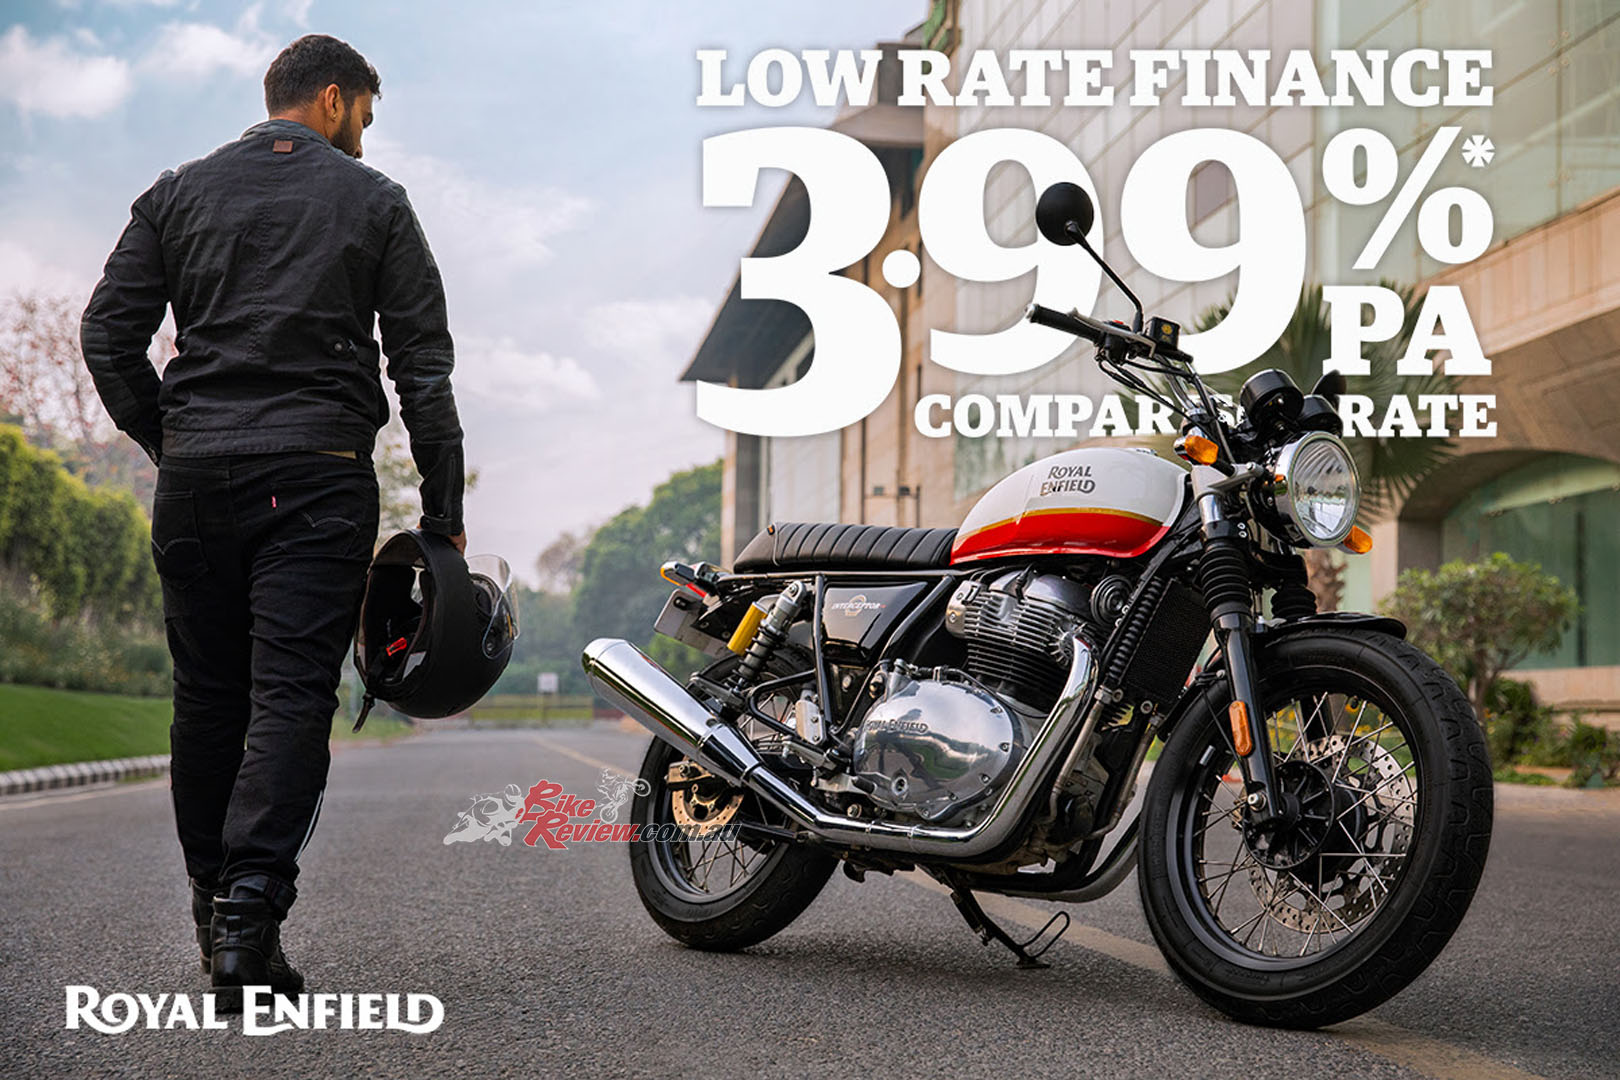 Grab A Deal On A Royal Enfield With Low Comparison Rates - Bike Review